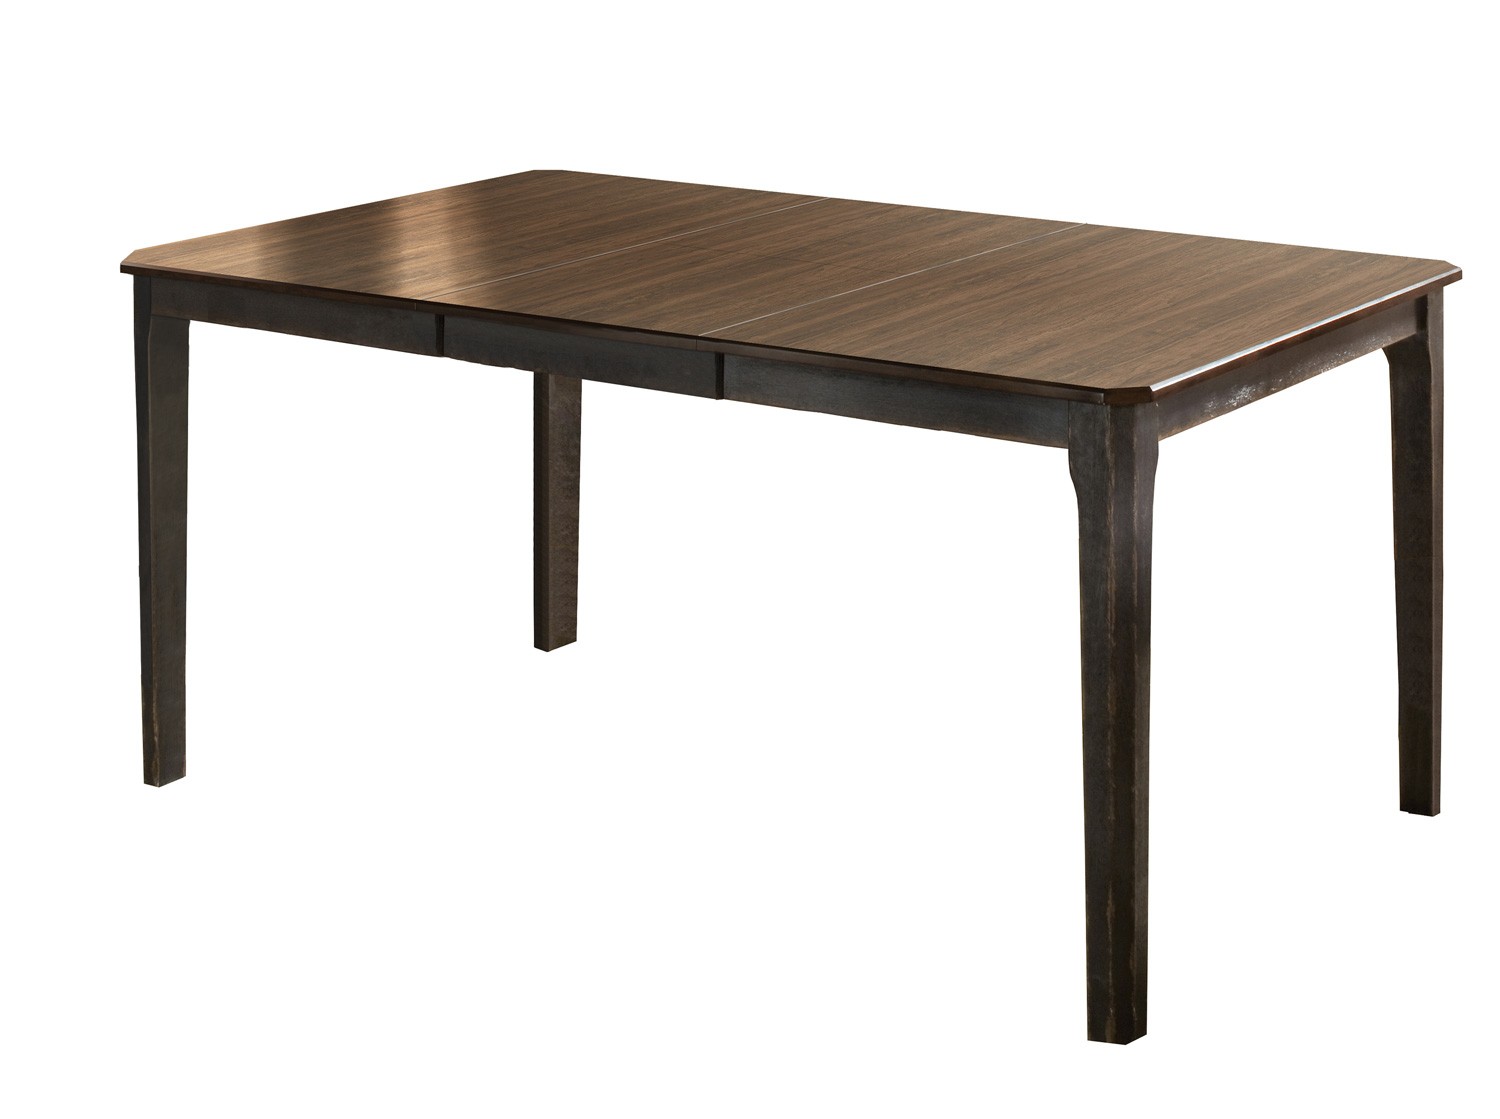 Hillsdale Lafayette Extension Dining Table - Black Gray with Walnut